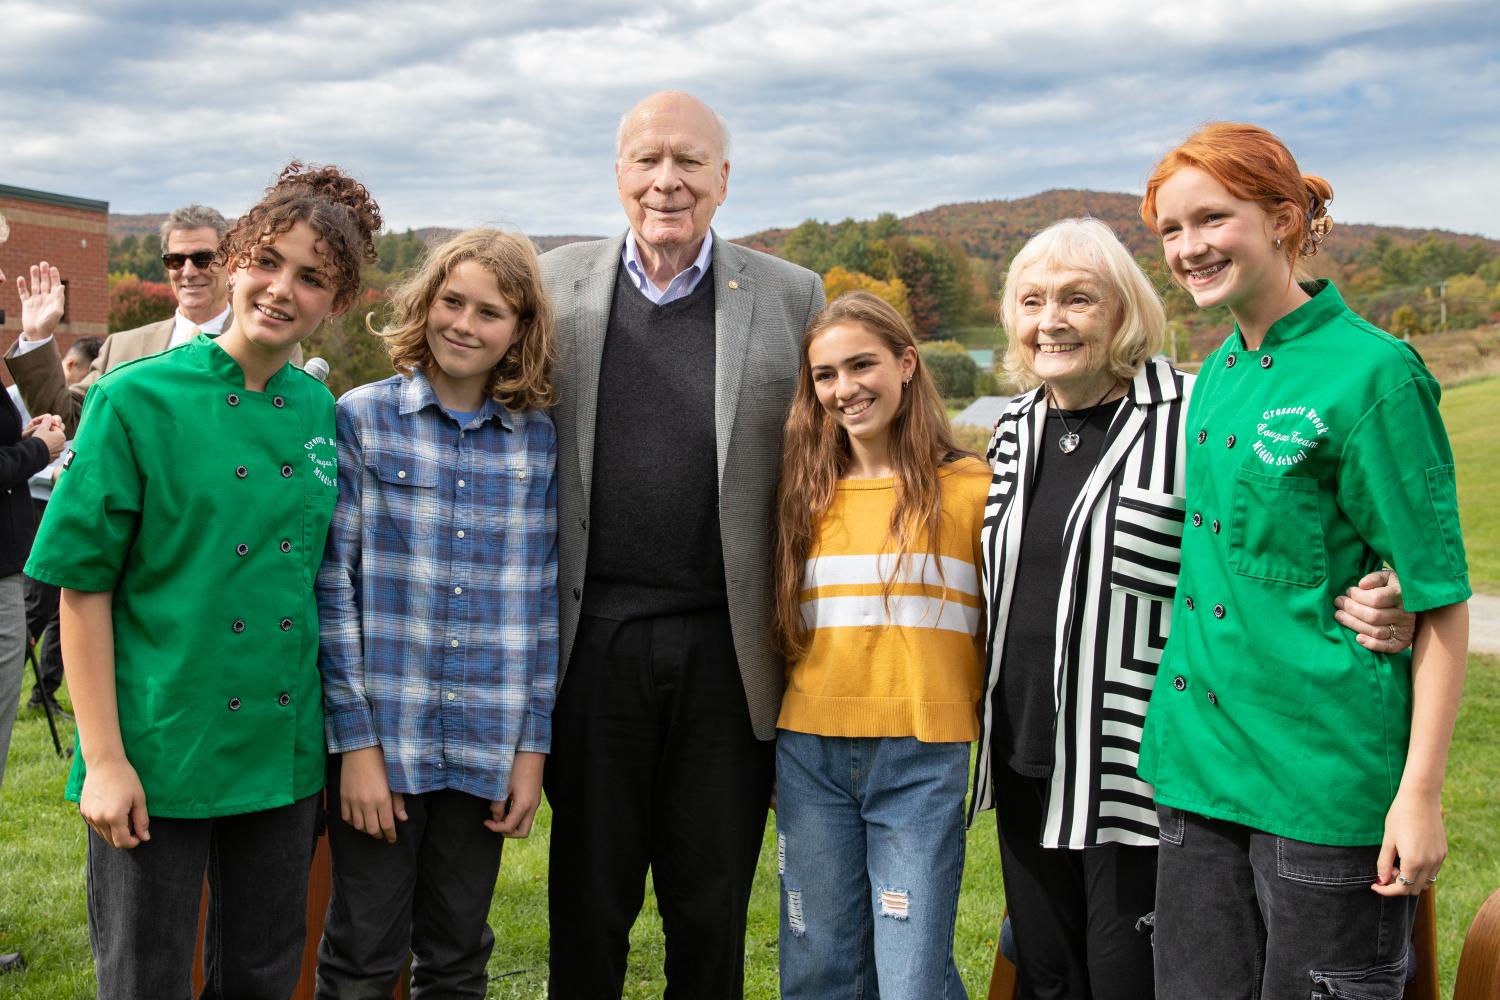 Senator Patrick Leahy and Marcelle Pomerleau celebrating Farm to School Month with students at Crossett Brook Elementary School, Waterbury, VT.